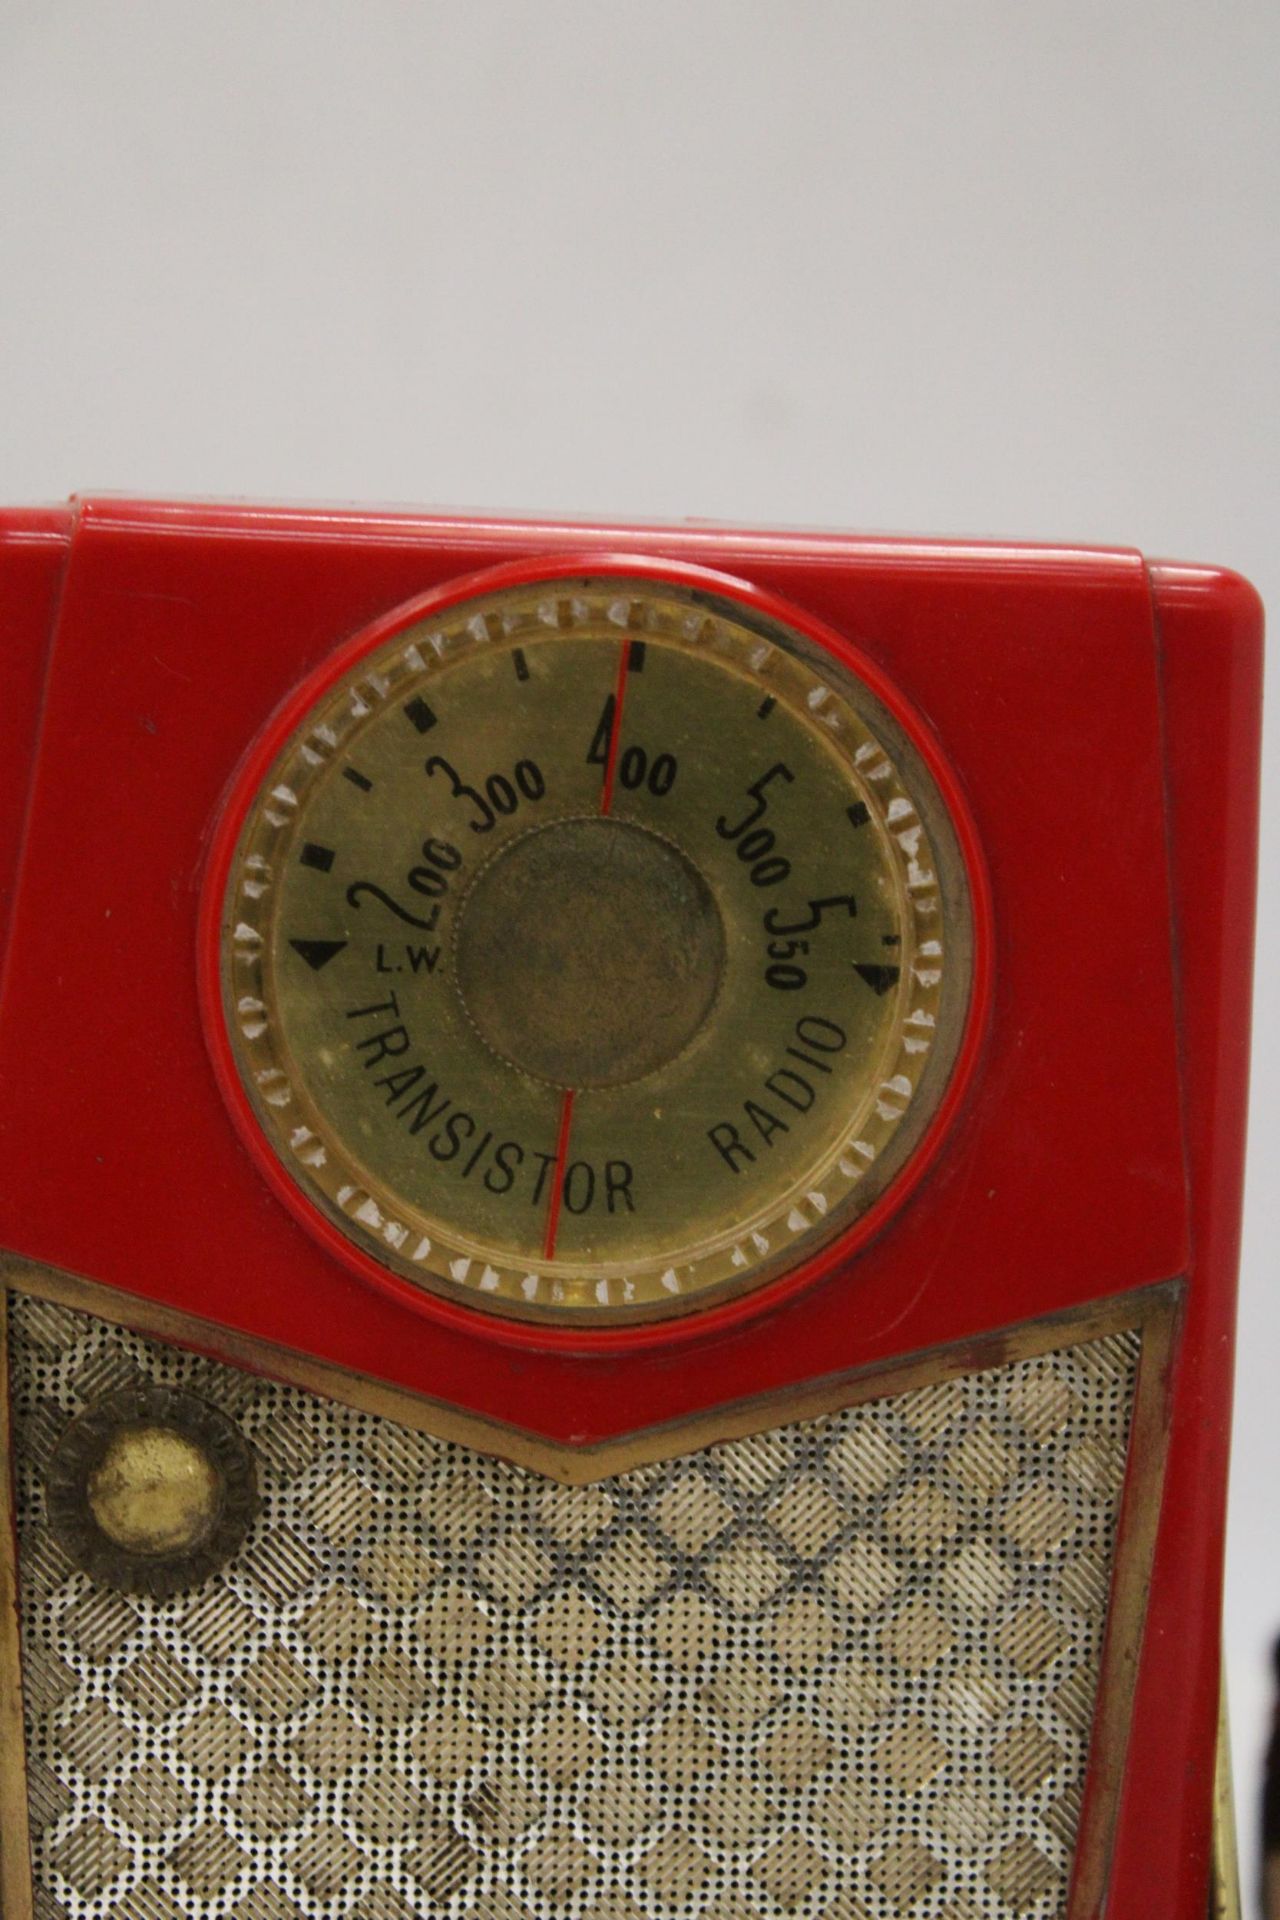 A VINTAGE EMERSON TRANSISTOR RADIO IN ORIGINAL CASE PLUS AN ORIENTAL METAL PIN TRAY WITH DRAGON - Image 6 of 6